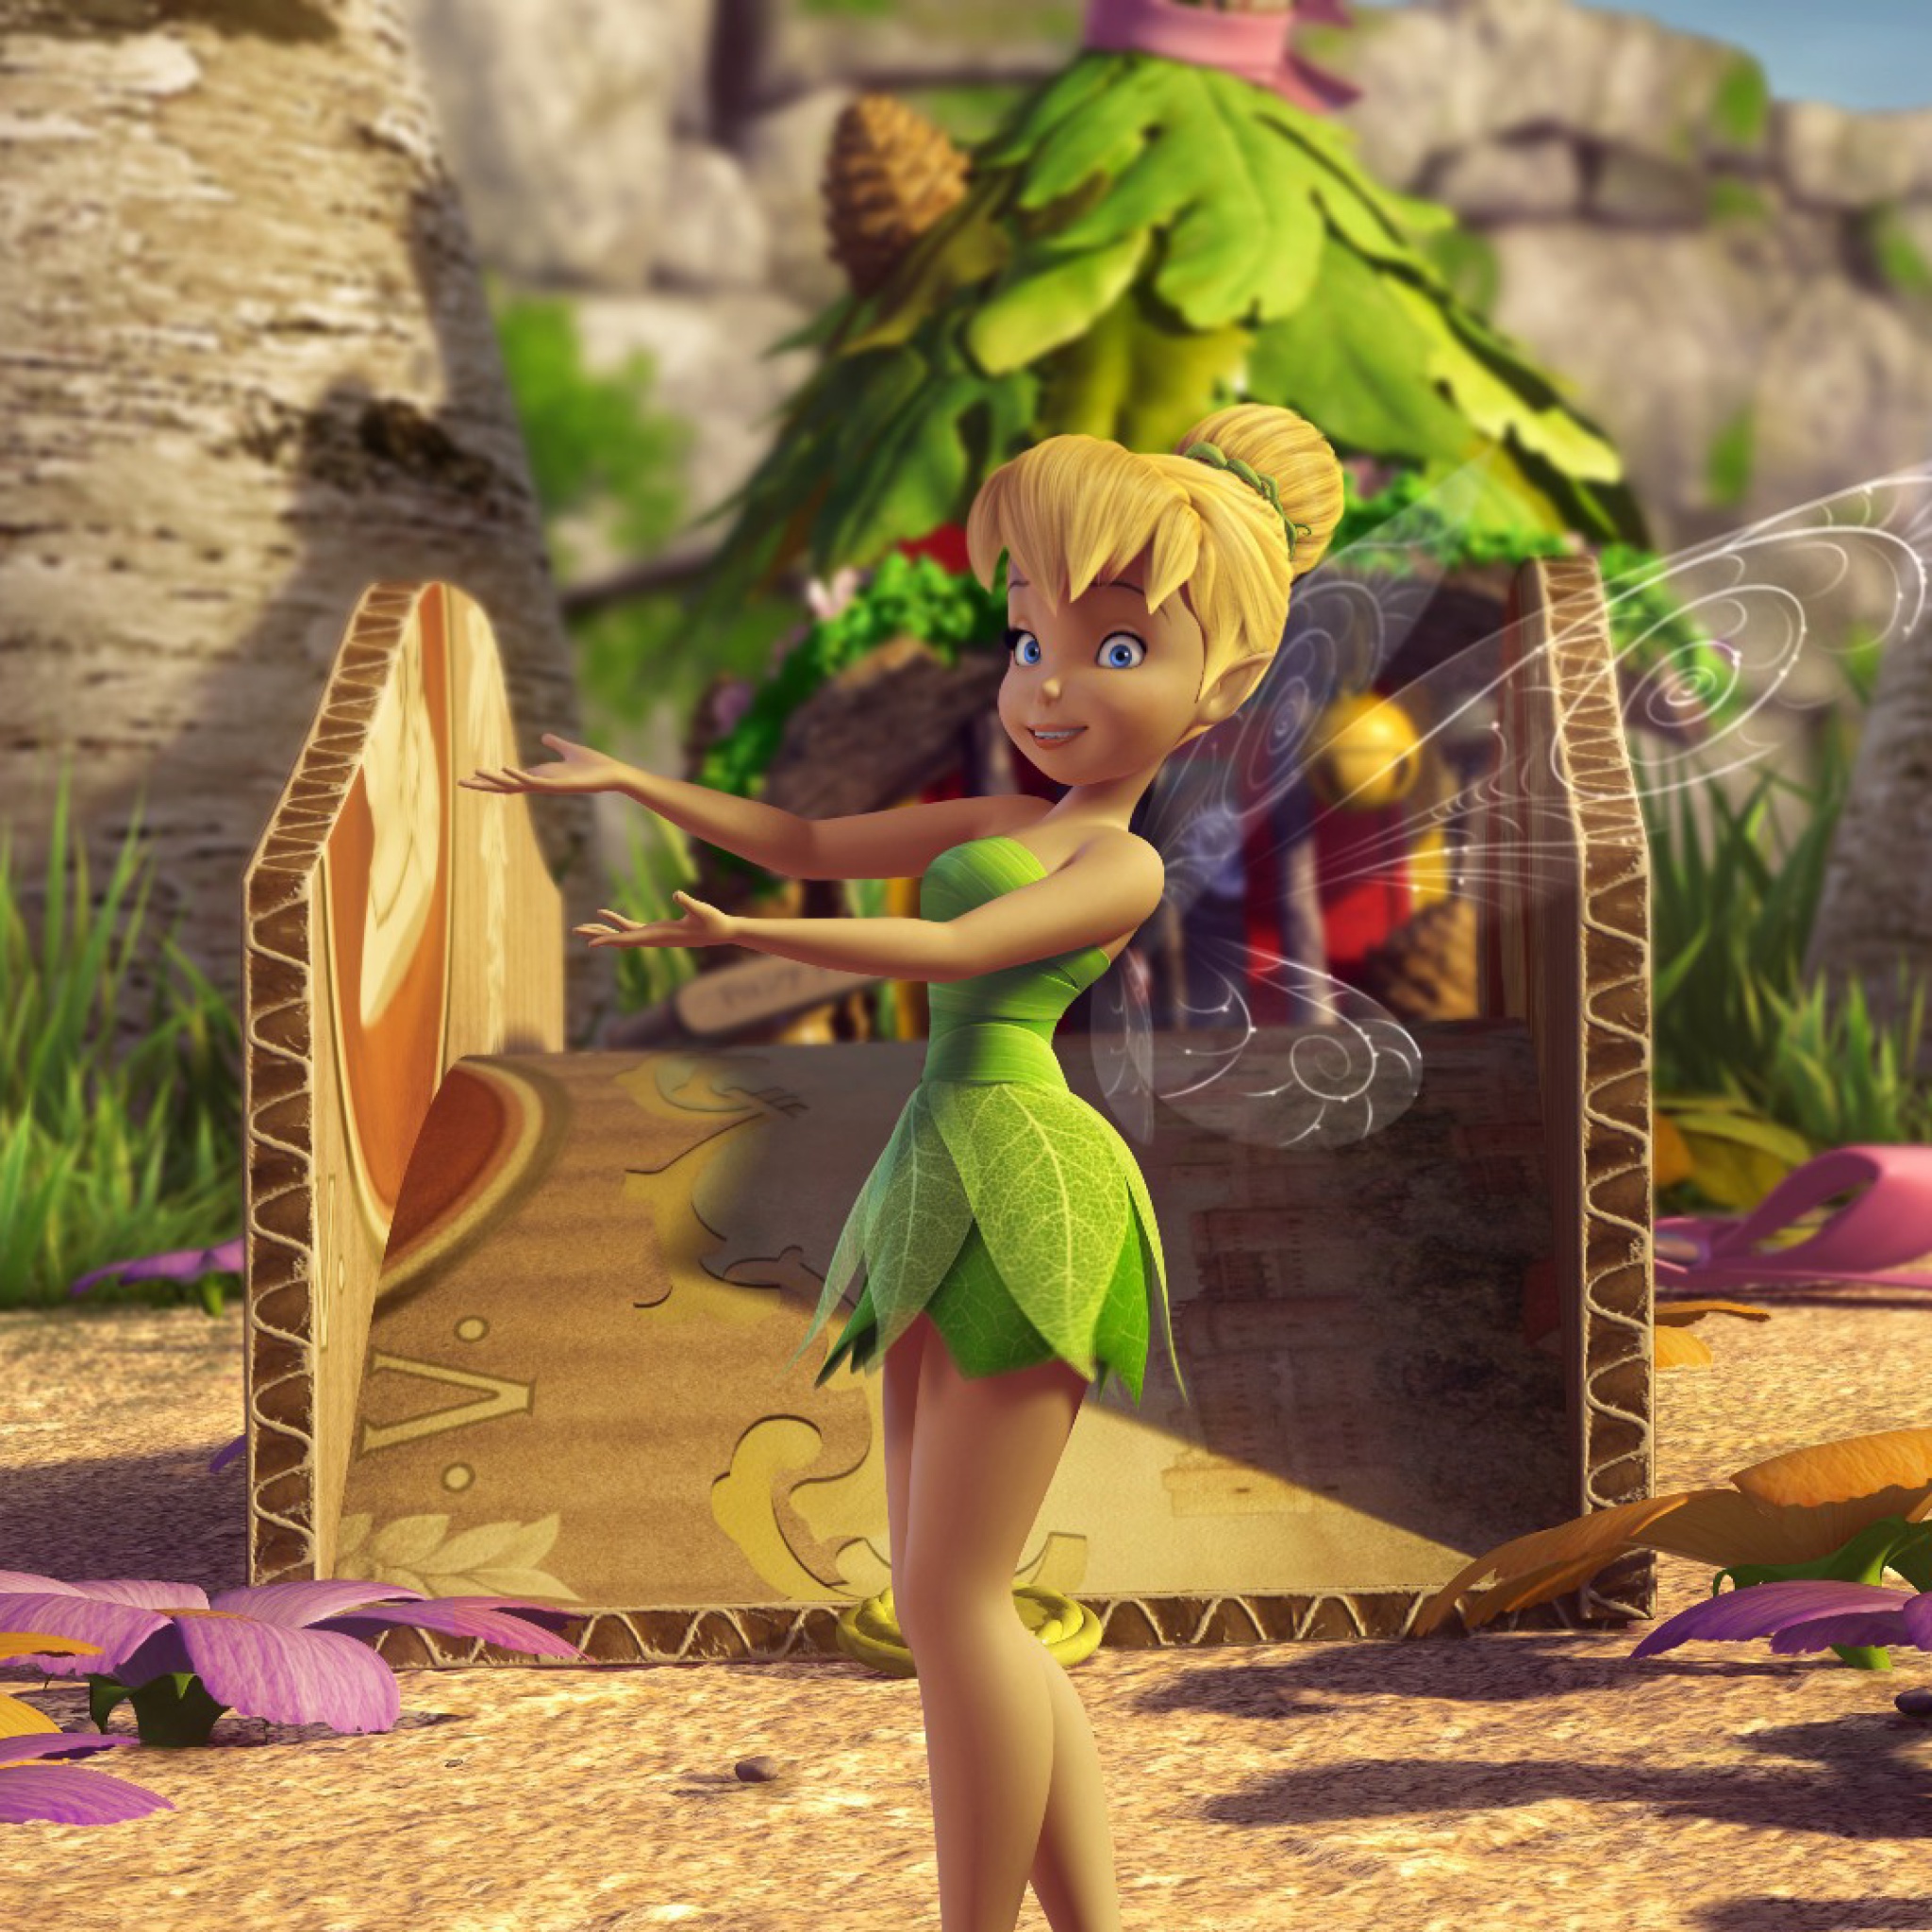 Tinker Bell And The Great Fairy Rescue 2 wallpaper 2048x2048